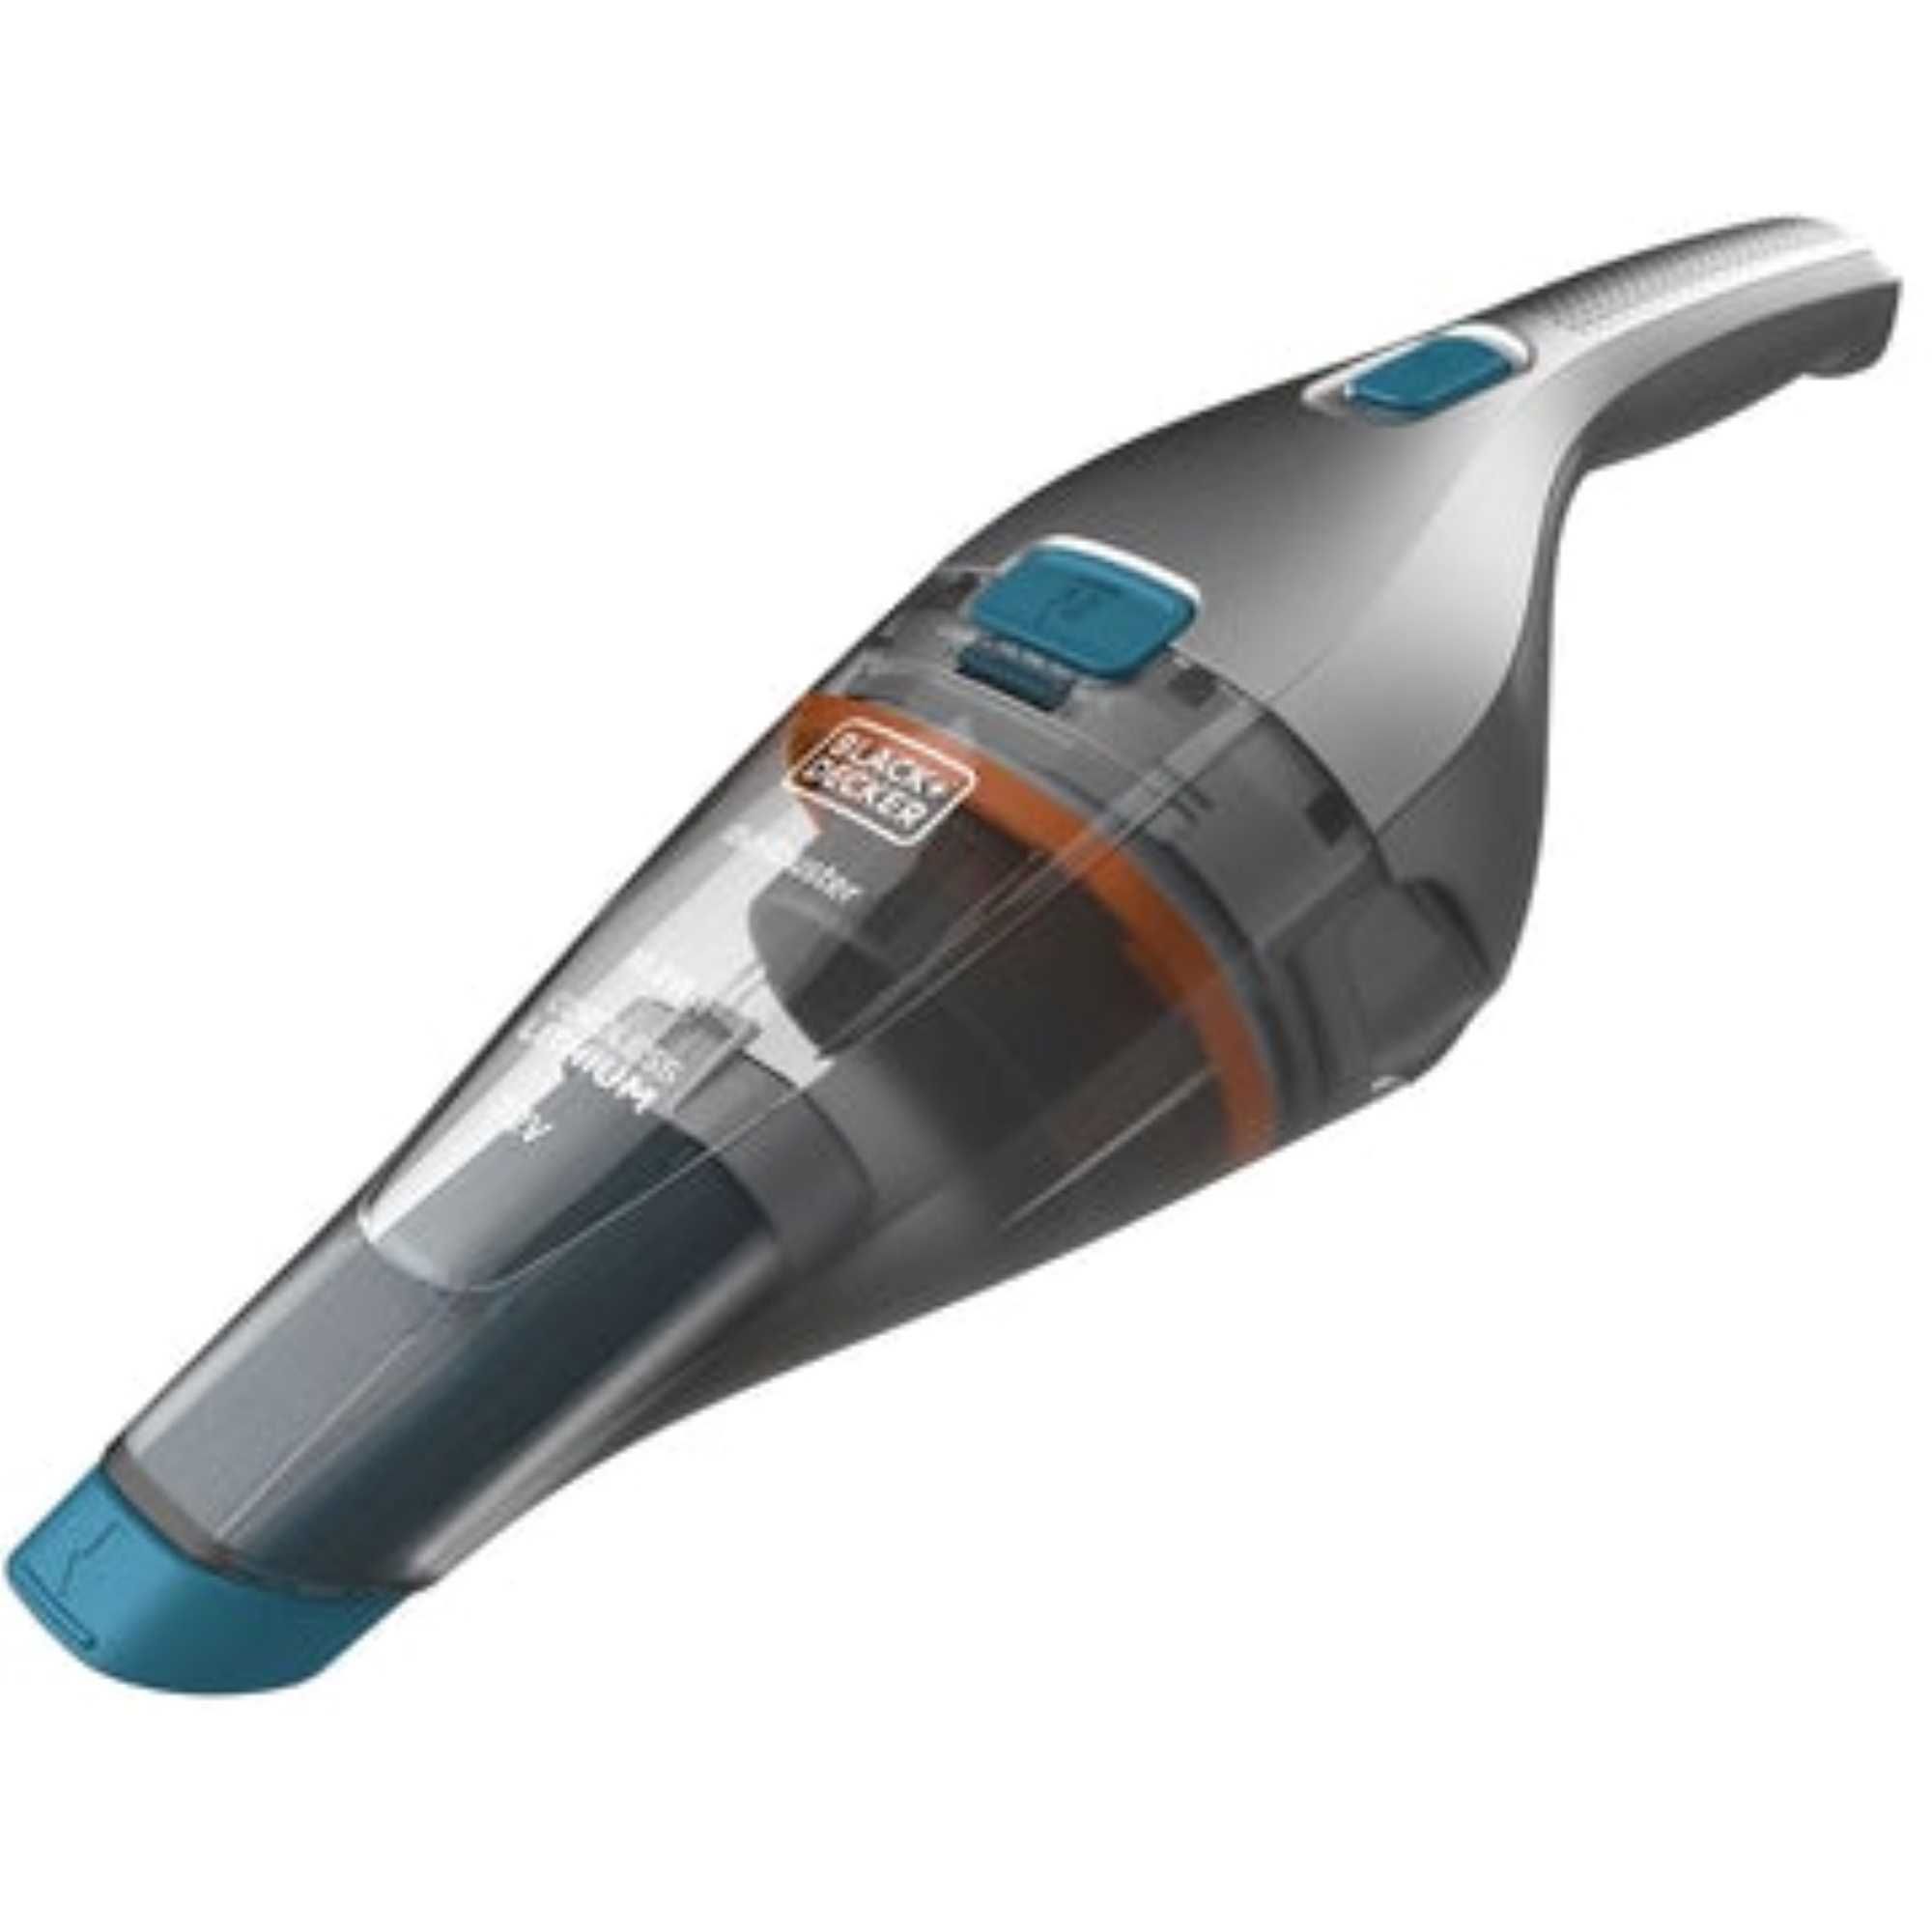 BLACK+DECKER 7.2V CORDLESS DUSTBUSTER HAND VACUUM WITH ACCESSORIES